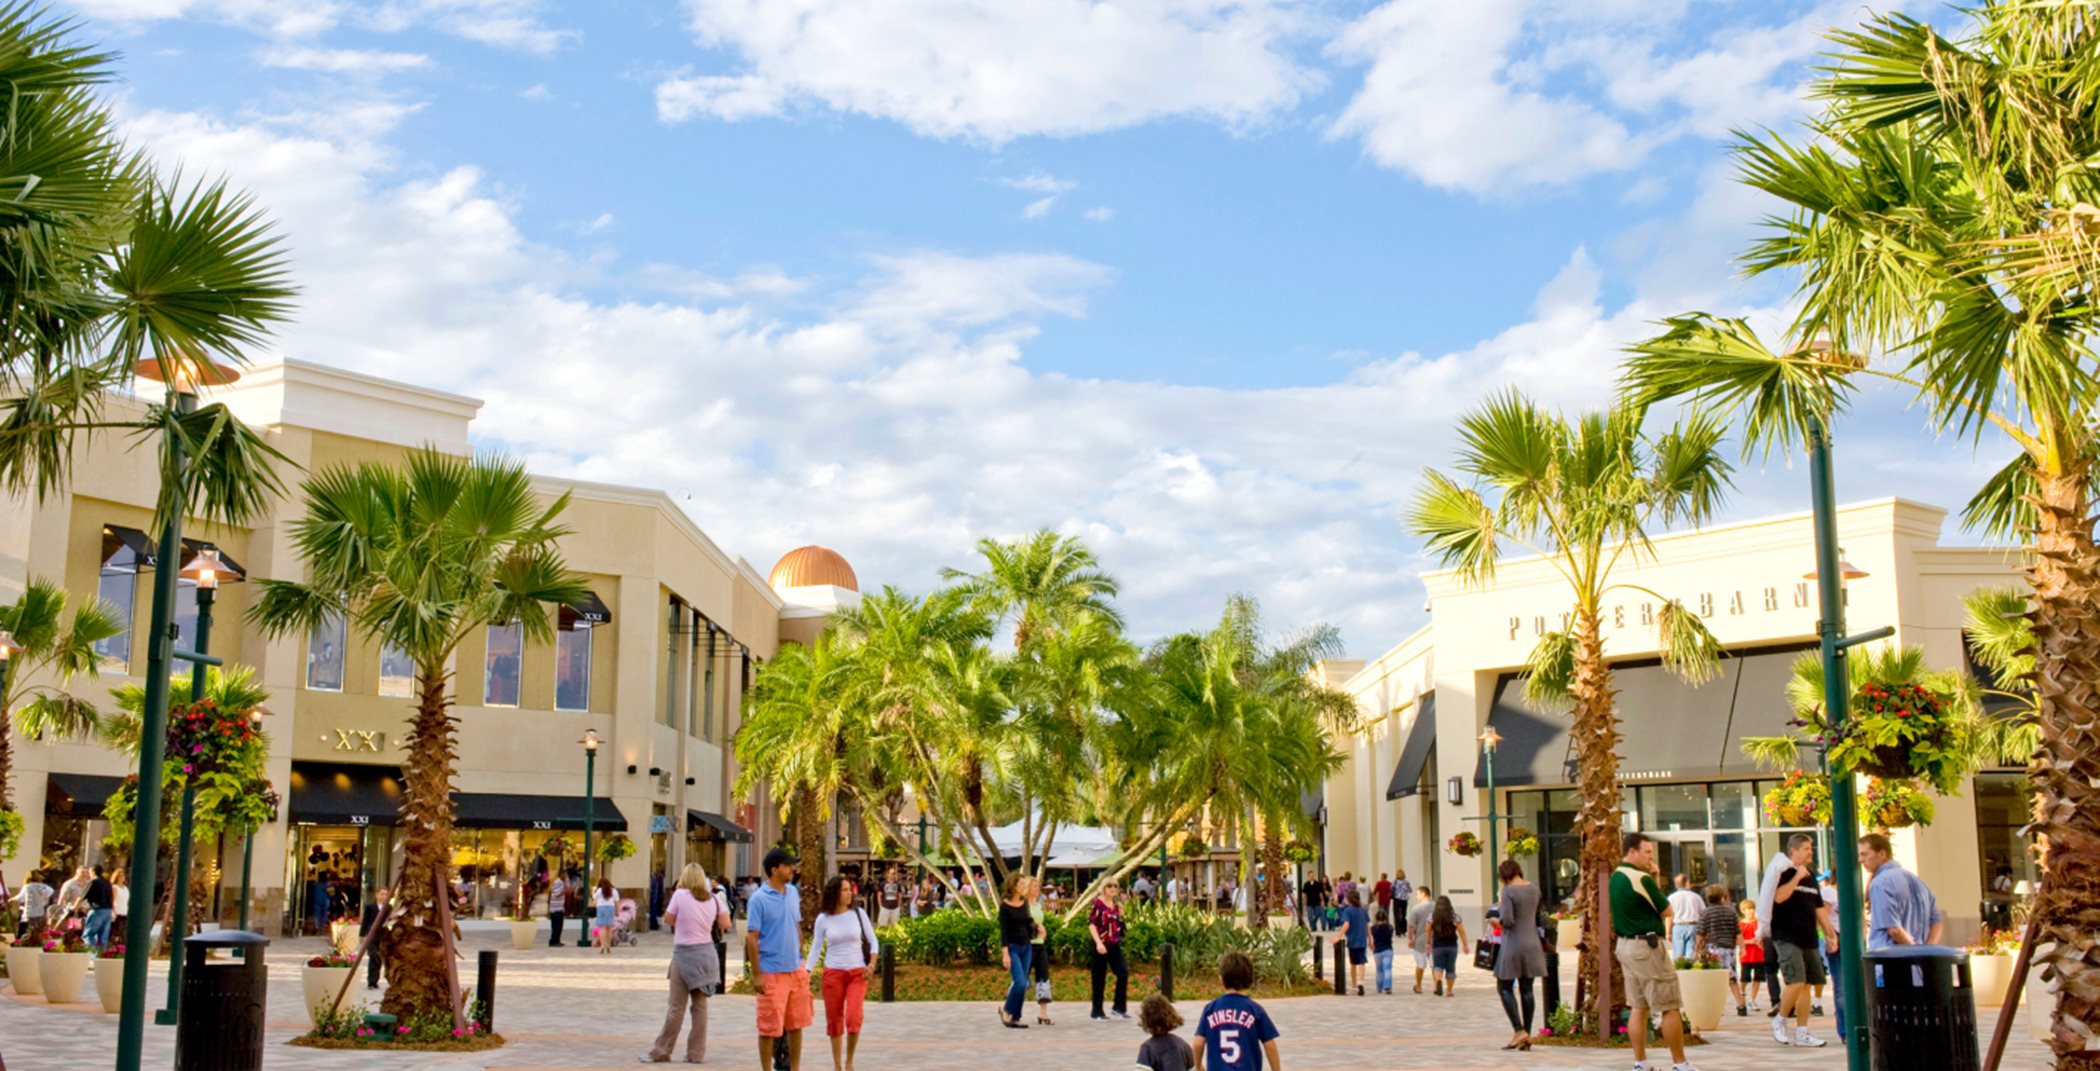 Exterior view of The Shops at Wiregrass